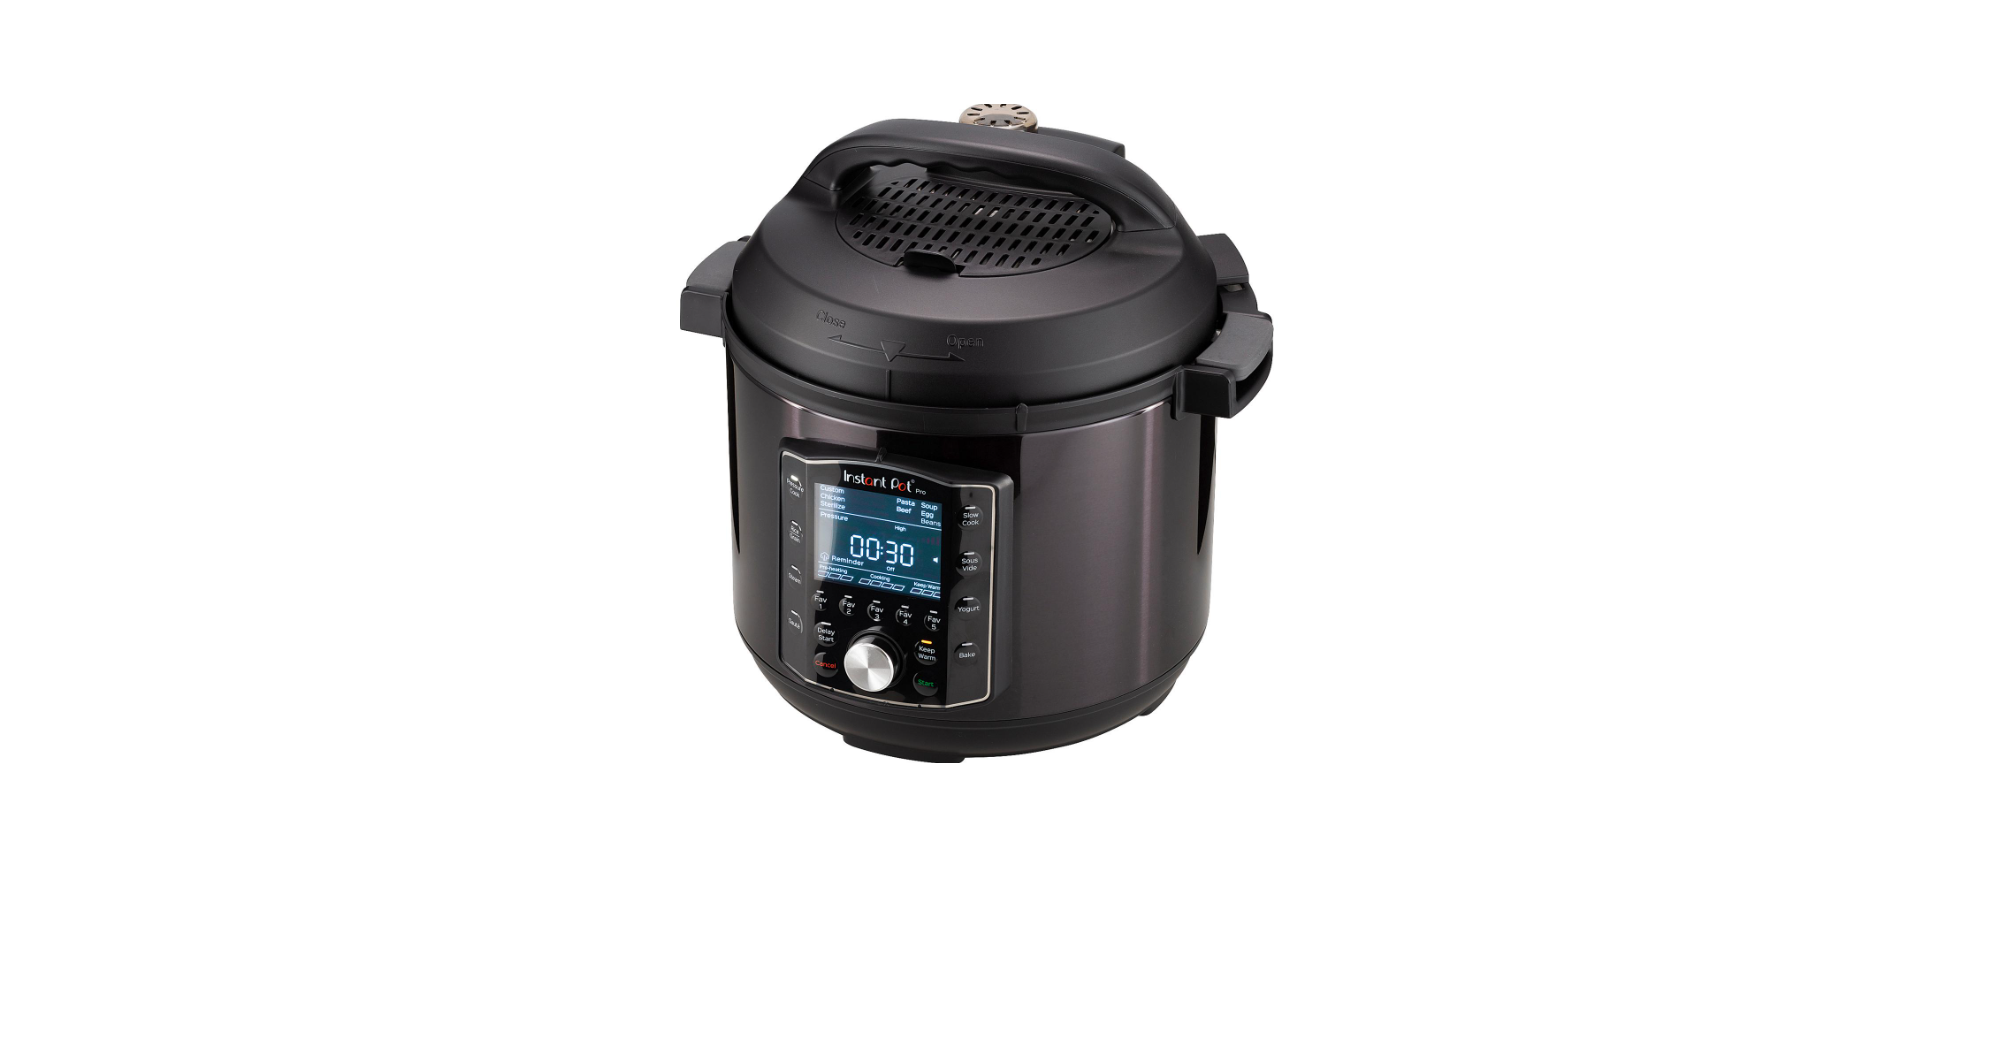 How to Use the Instant Pot Pro 